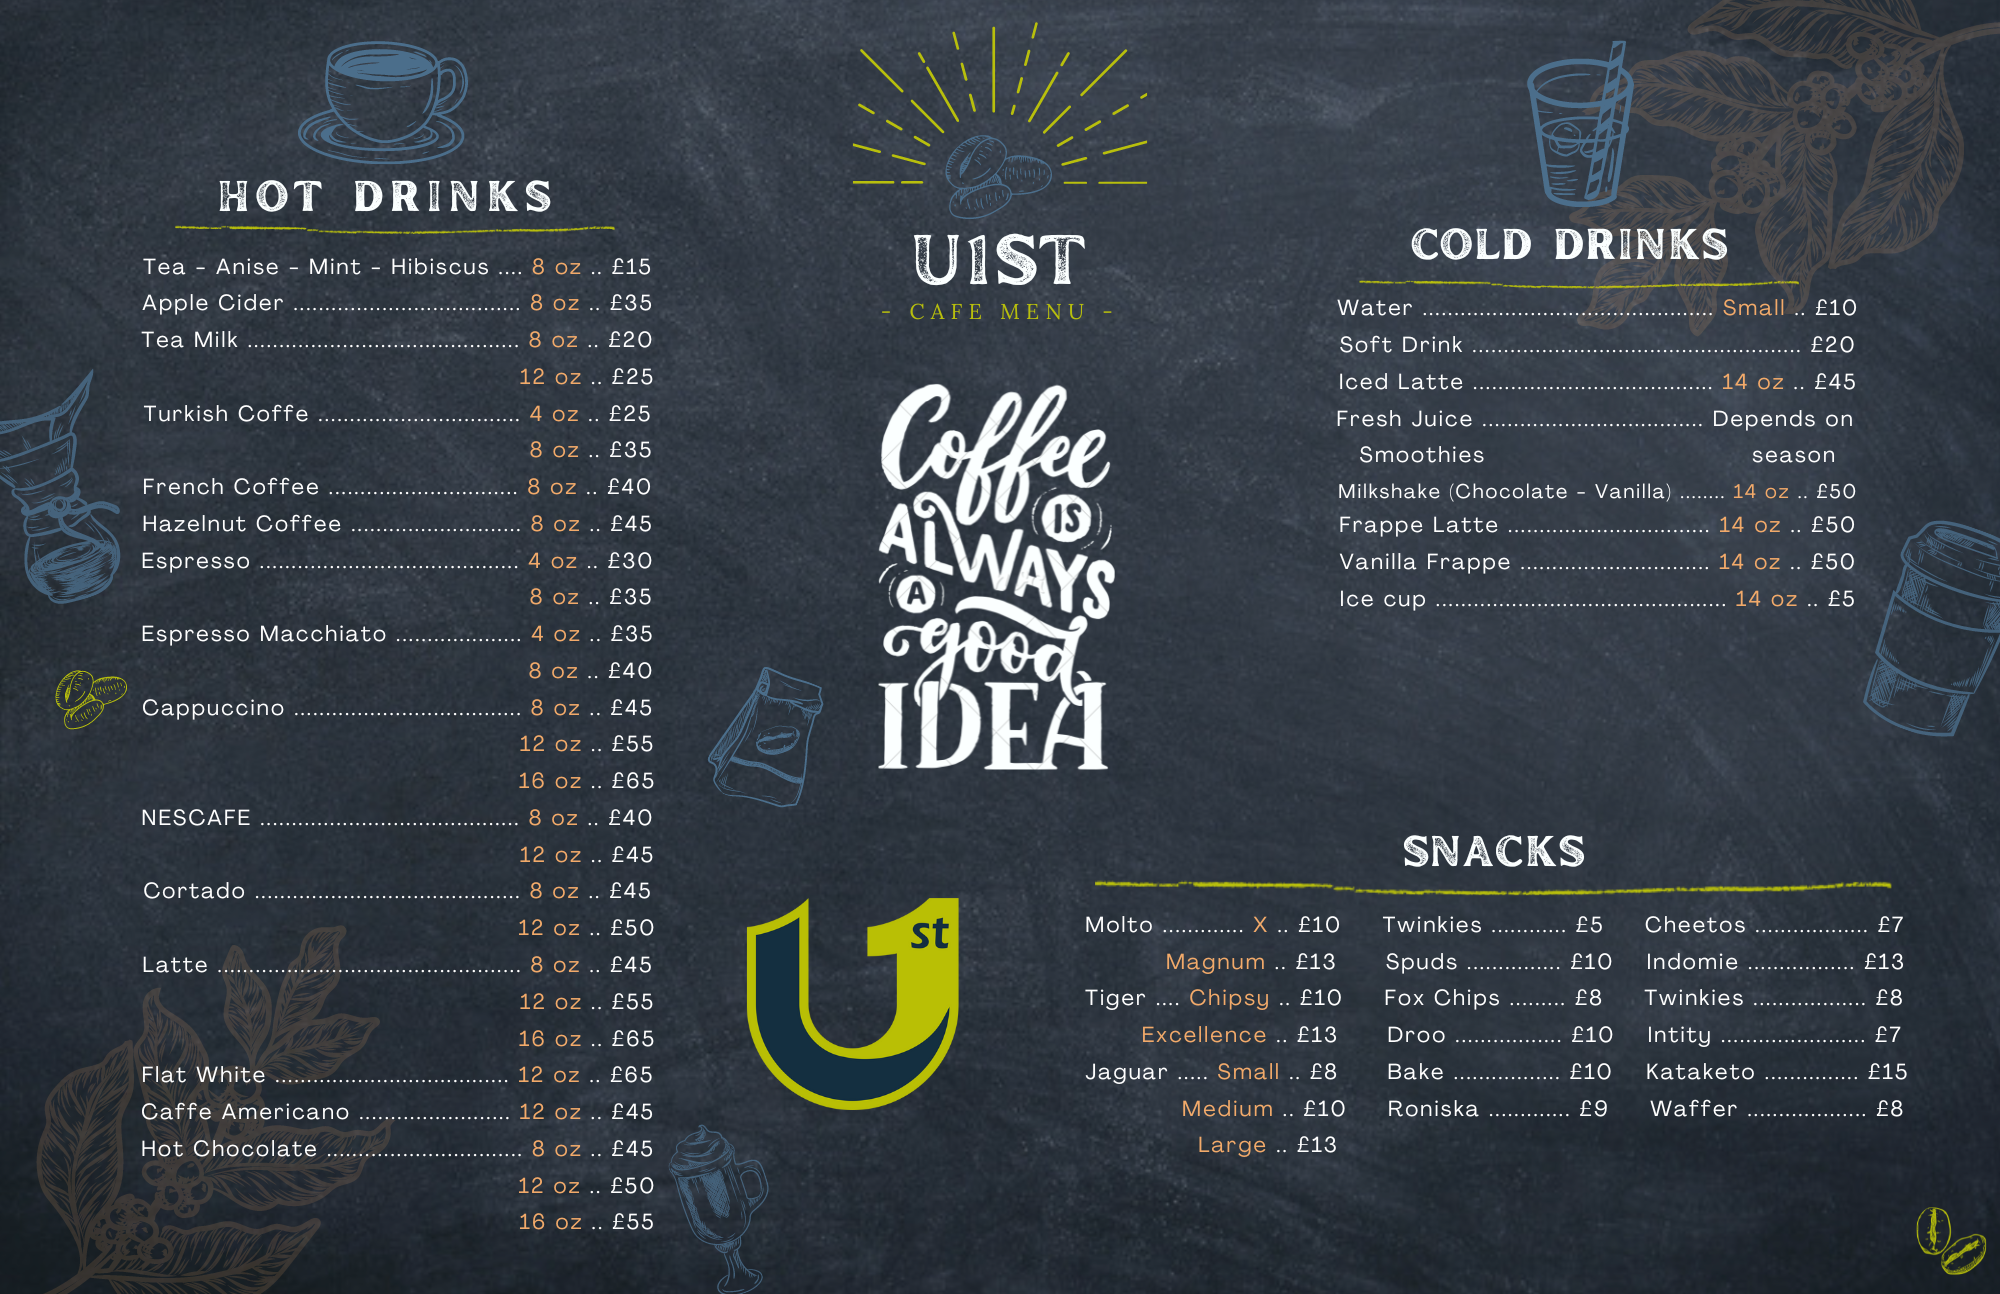 Cafe prices